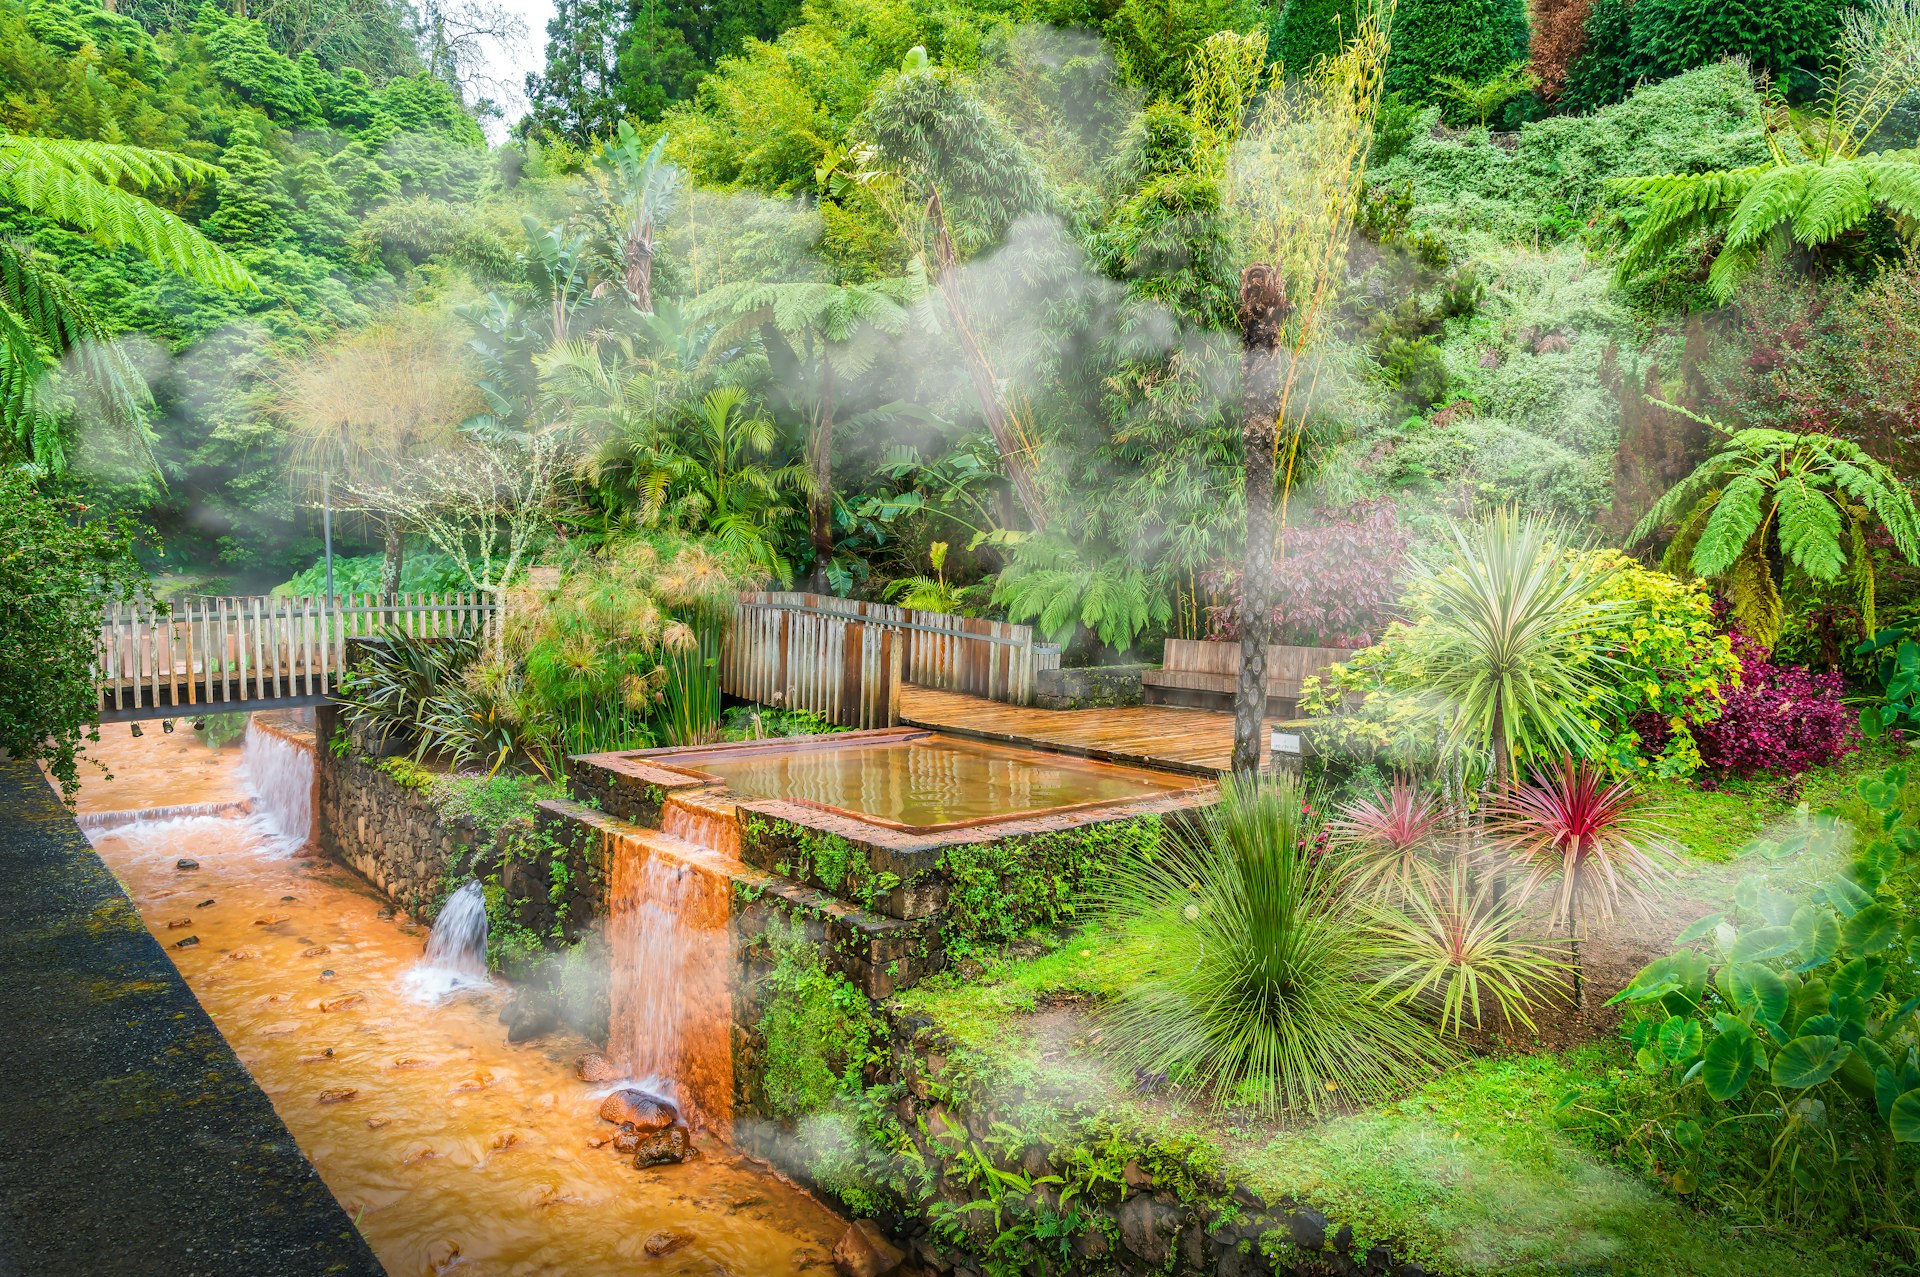 Hot spring baths set in a lush landscape with tropical plants and steam rising from the volcanically heated water.